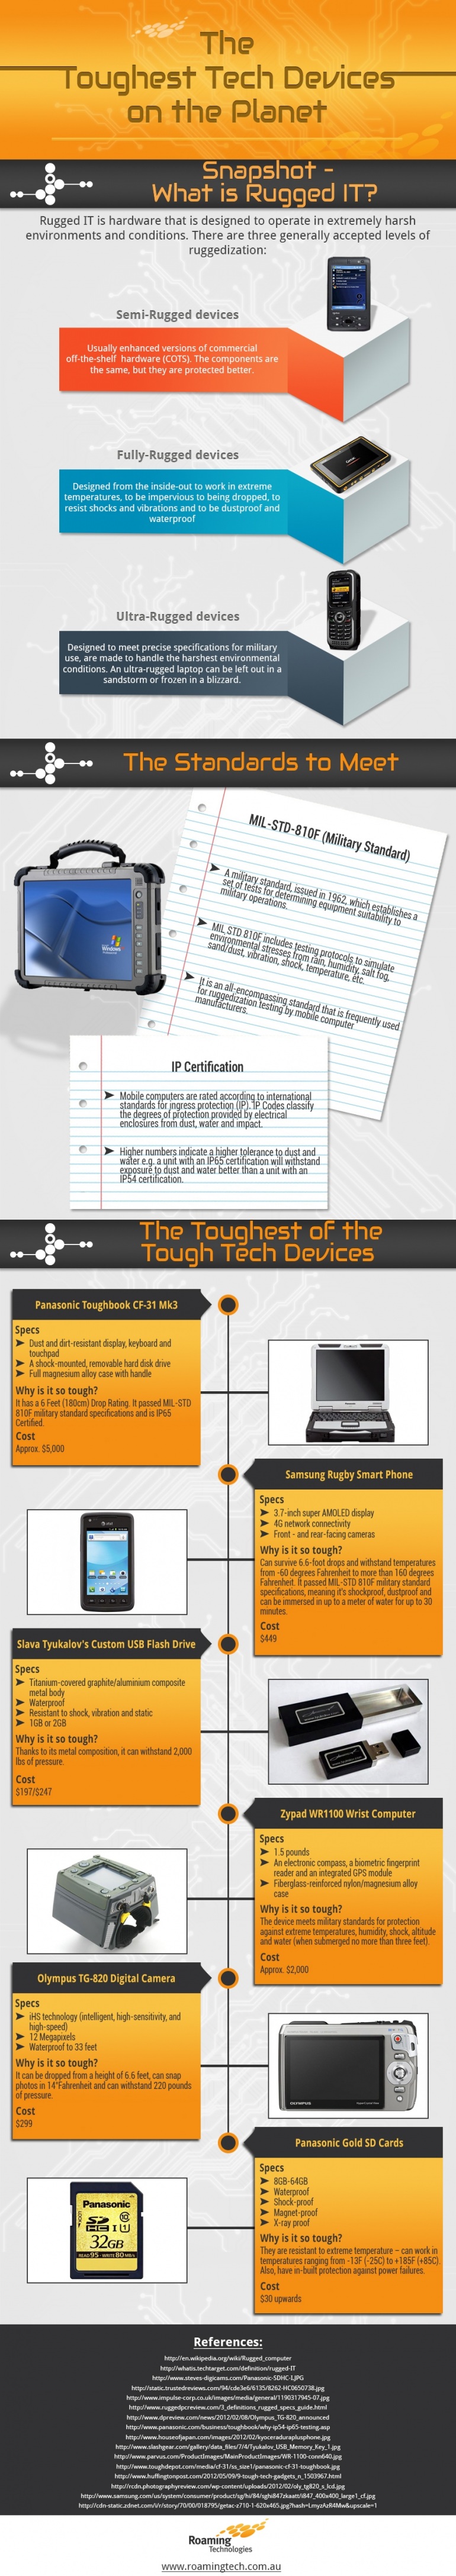 Graph for The 10 toughest tech devices in the world